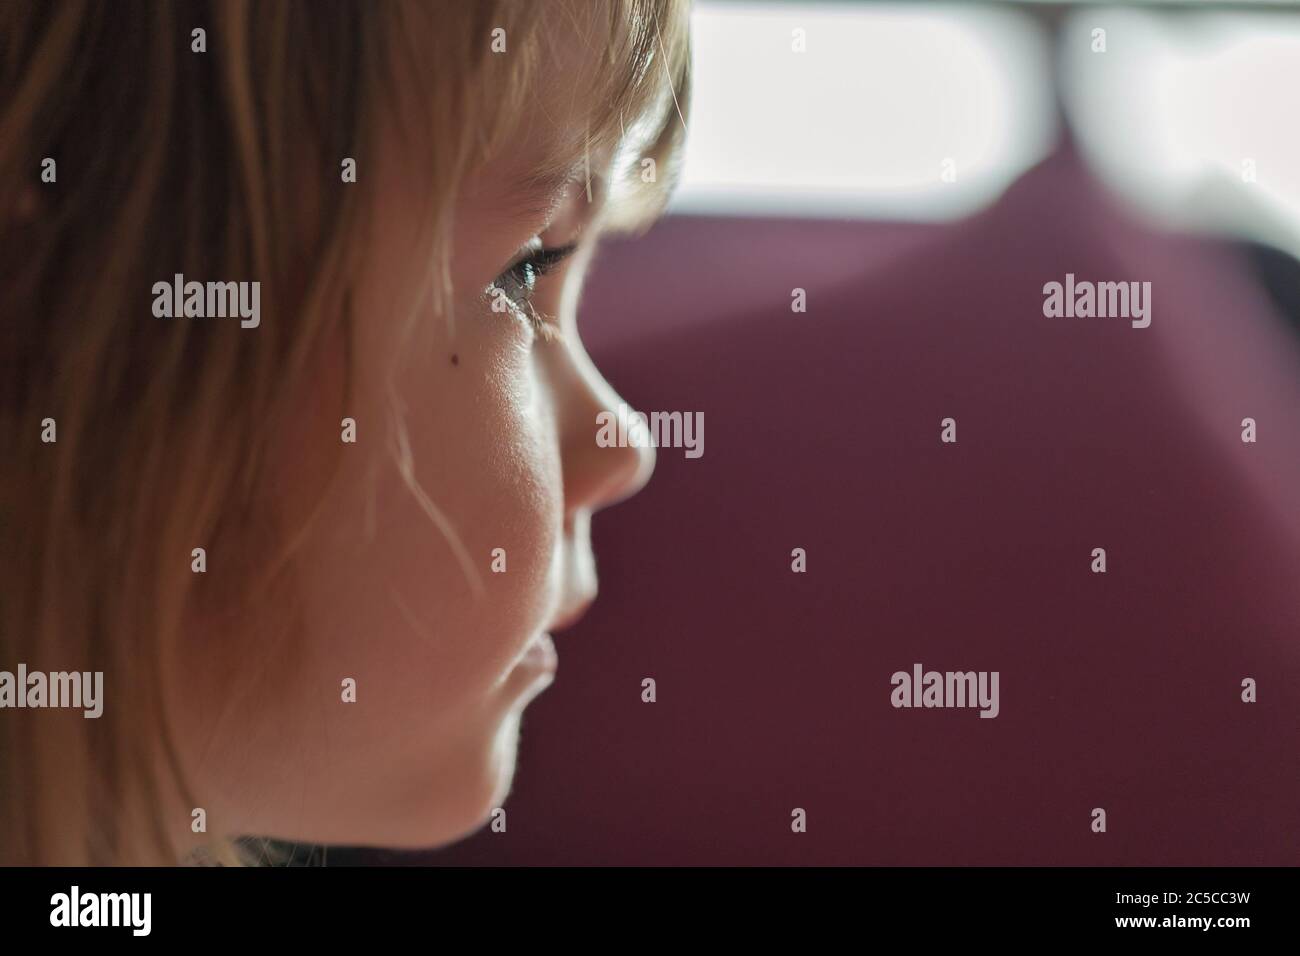 image of a child from profile while looking cartoon, note shallow depth of field Stock Photo